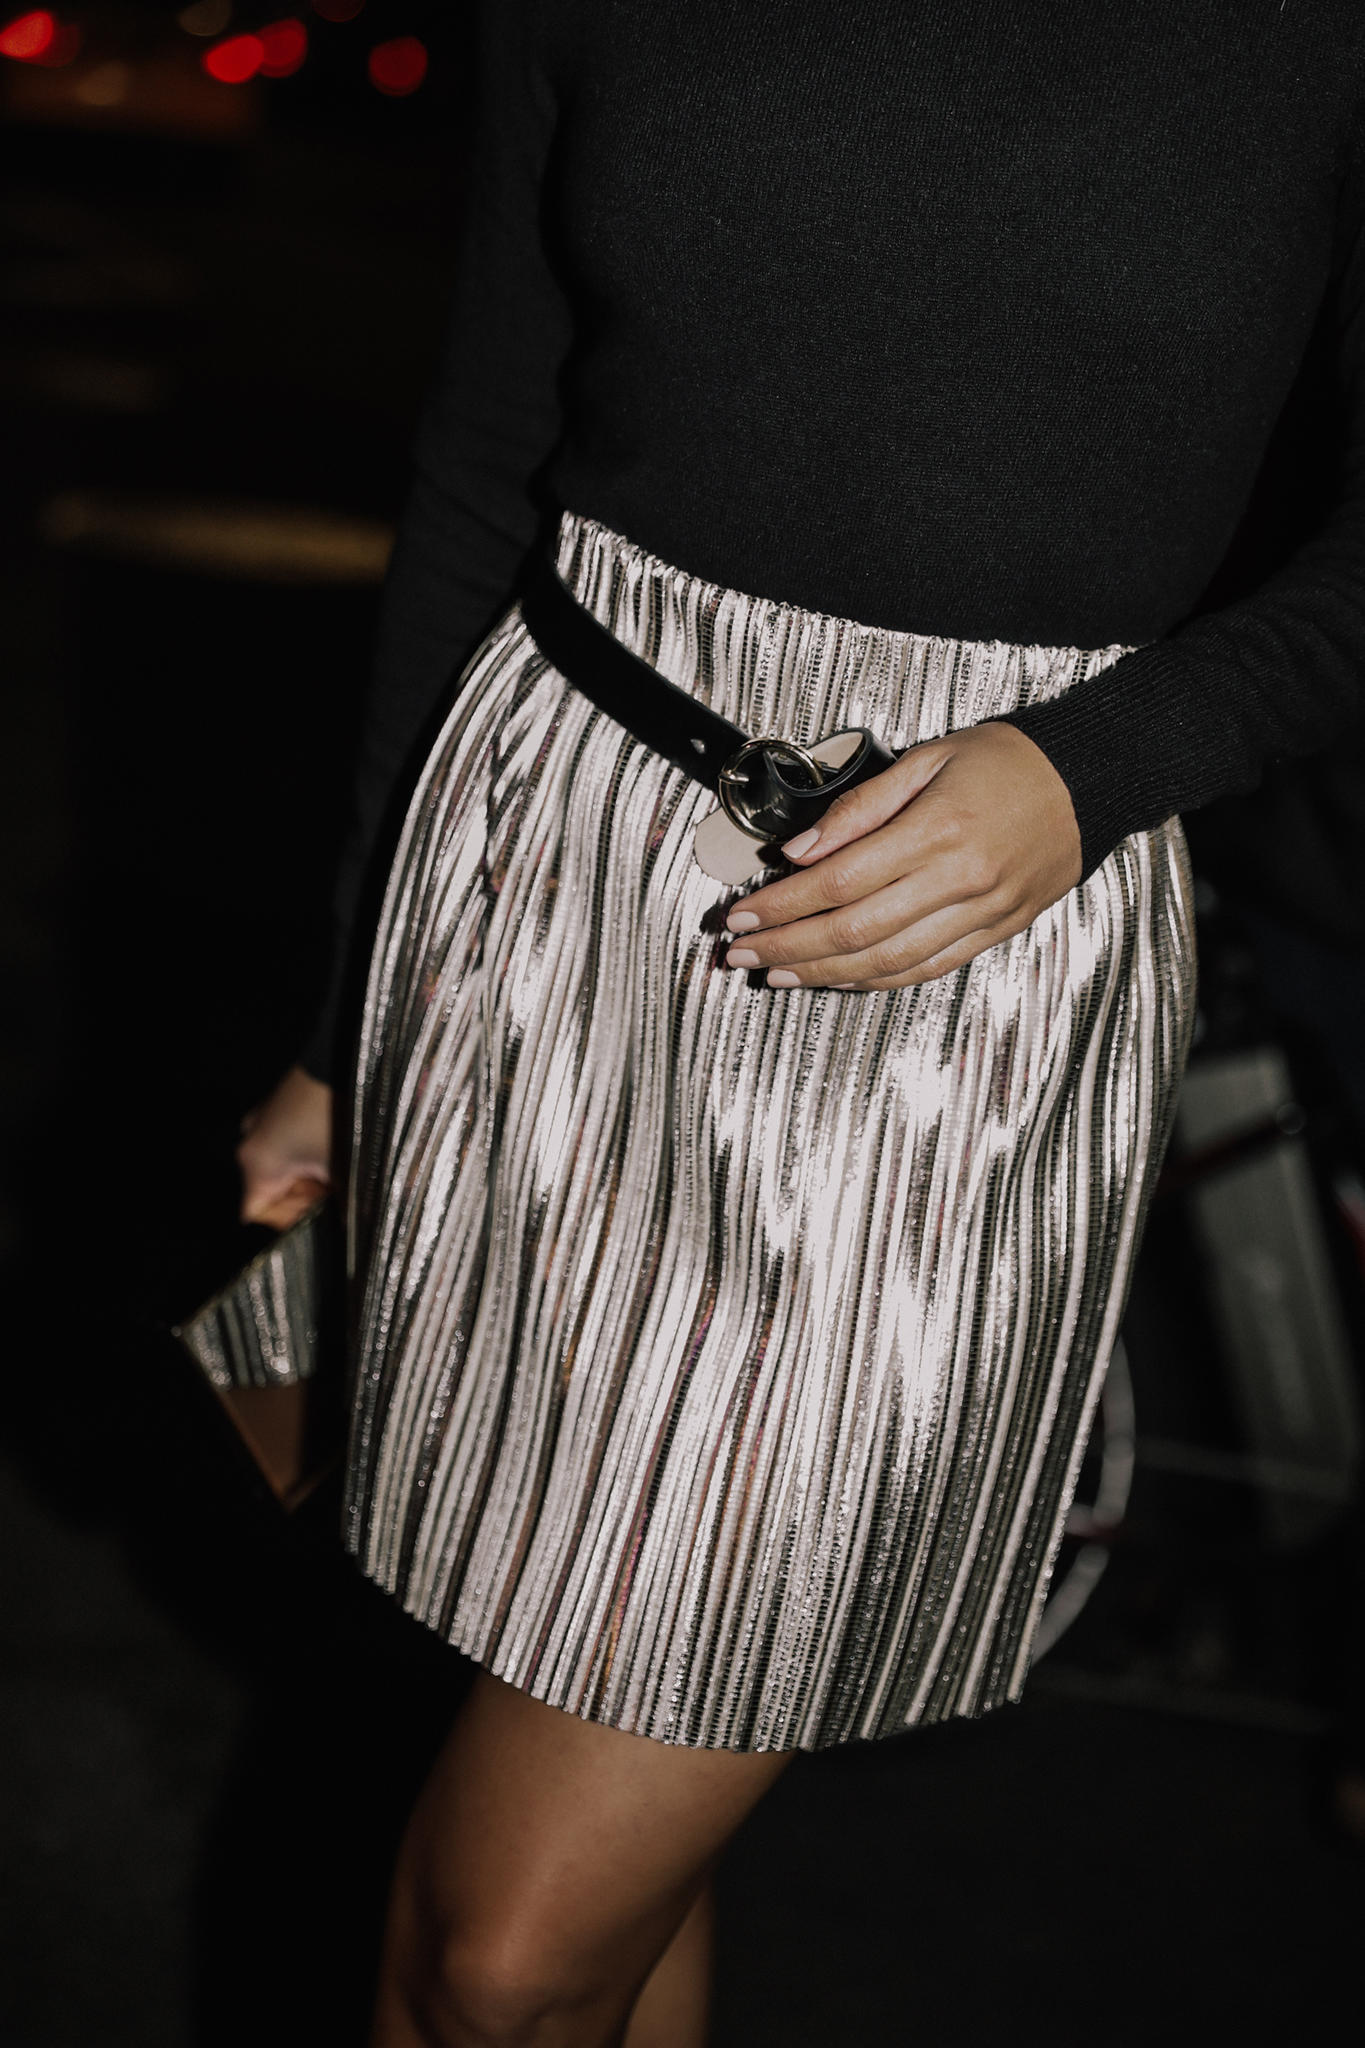 5 Festive Pieces to Wear to Your Next Holiday Party by Pam Hetlinger | TheGirlFromPanama.com | Metallic Skirt, holiday party outfit 2018, festive holiday party look, mini skirt and booties, winter party look